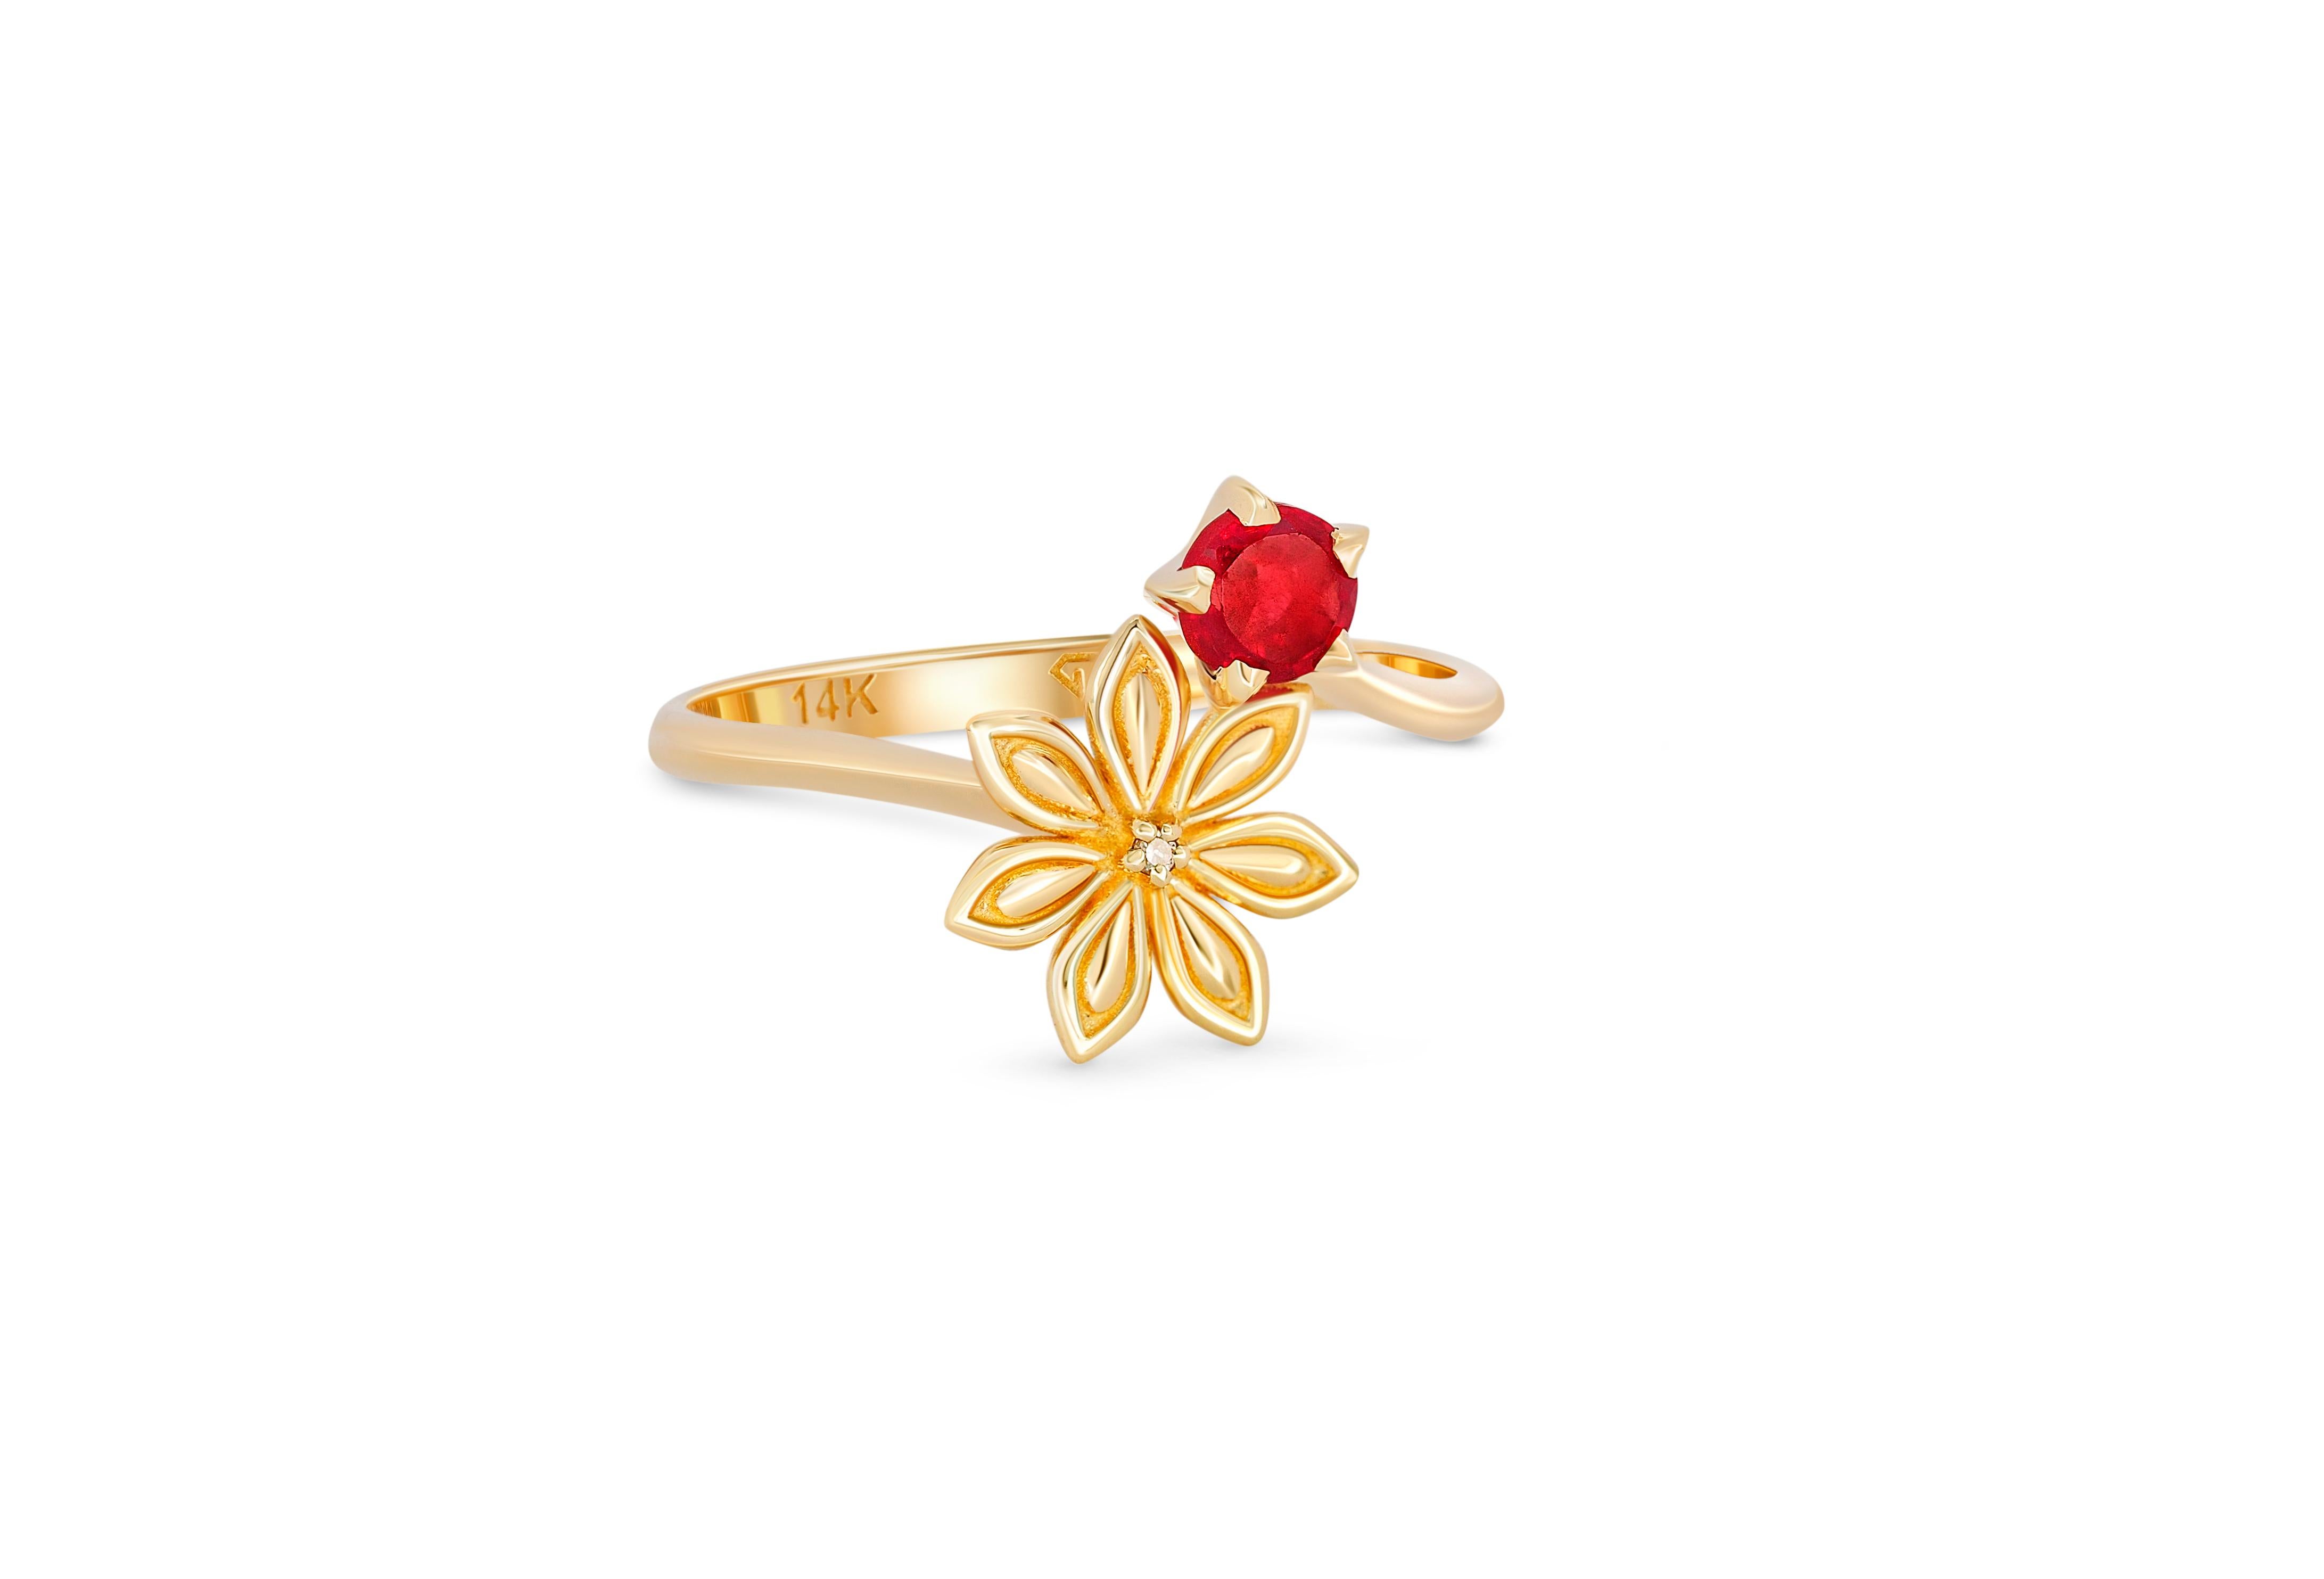 Star Anise Flower ring with ruby. 
Round ruby ring in 14 k gold. 0.5 ct ruby ring. Floral gold ring. July birthstone ring. Open ended ring.

Metal: 14k gold
Weight: 1.8 g. depends from size.

Central stone: ruby
Cut: ruby
Weight: aprx 0.52